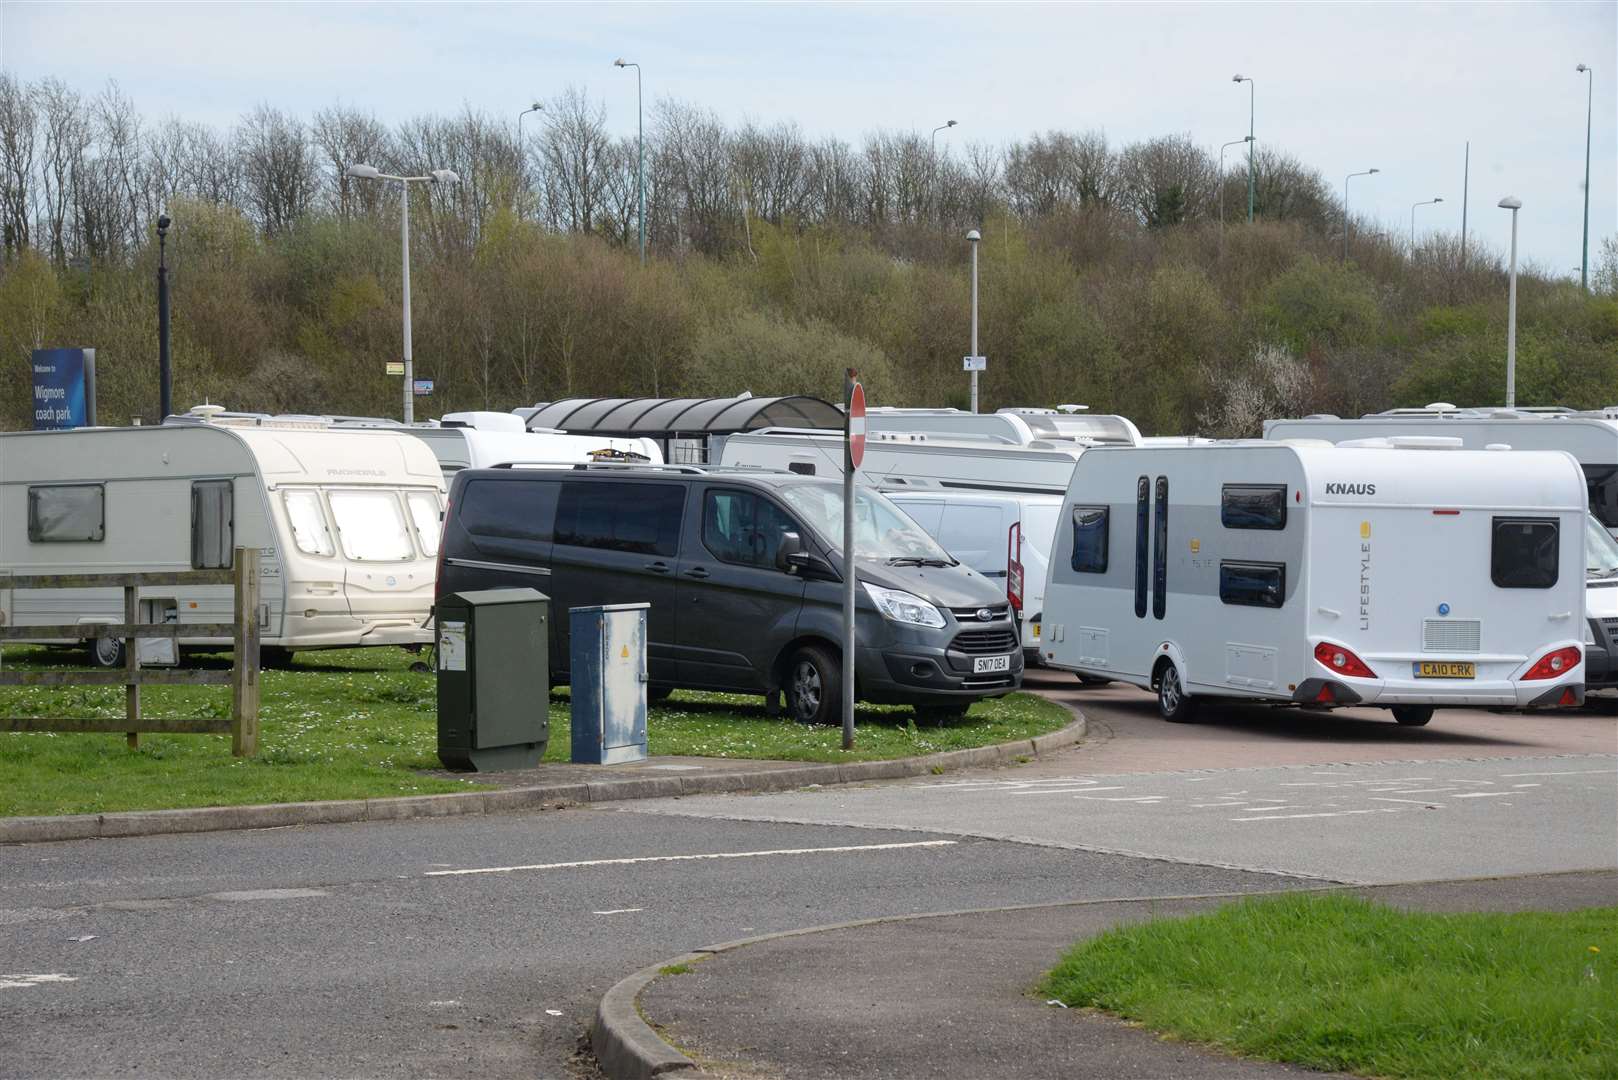 New police guidelines have been issued on illegal traveller camps